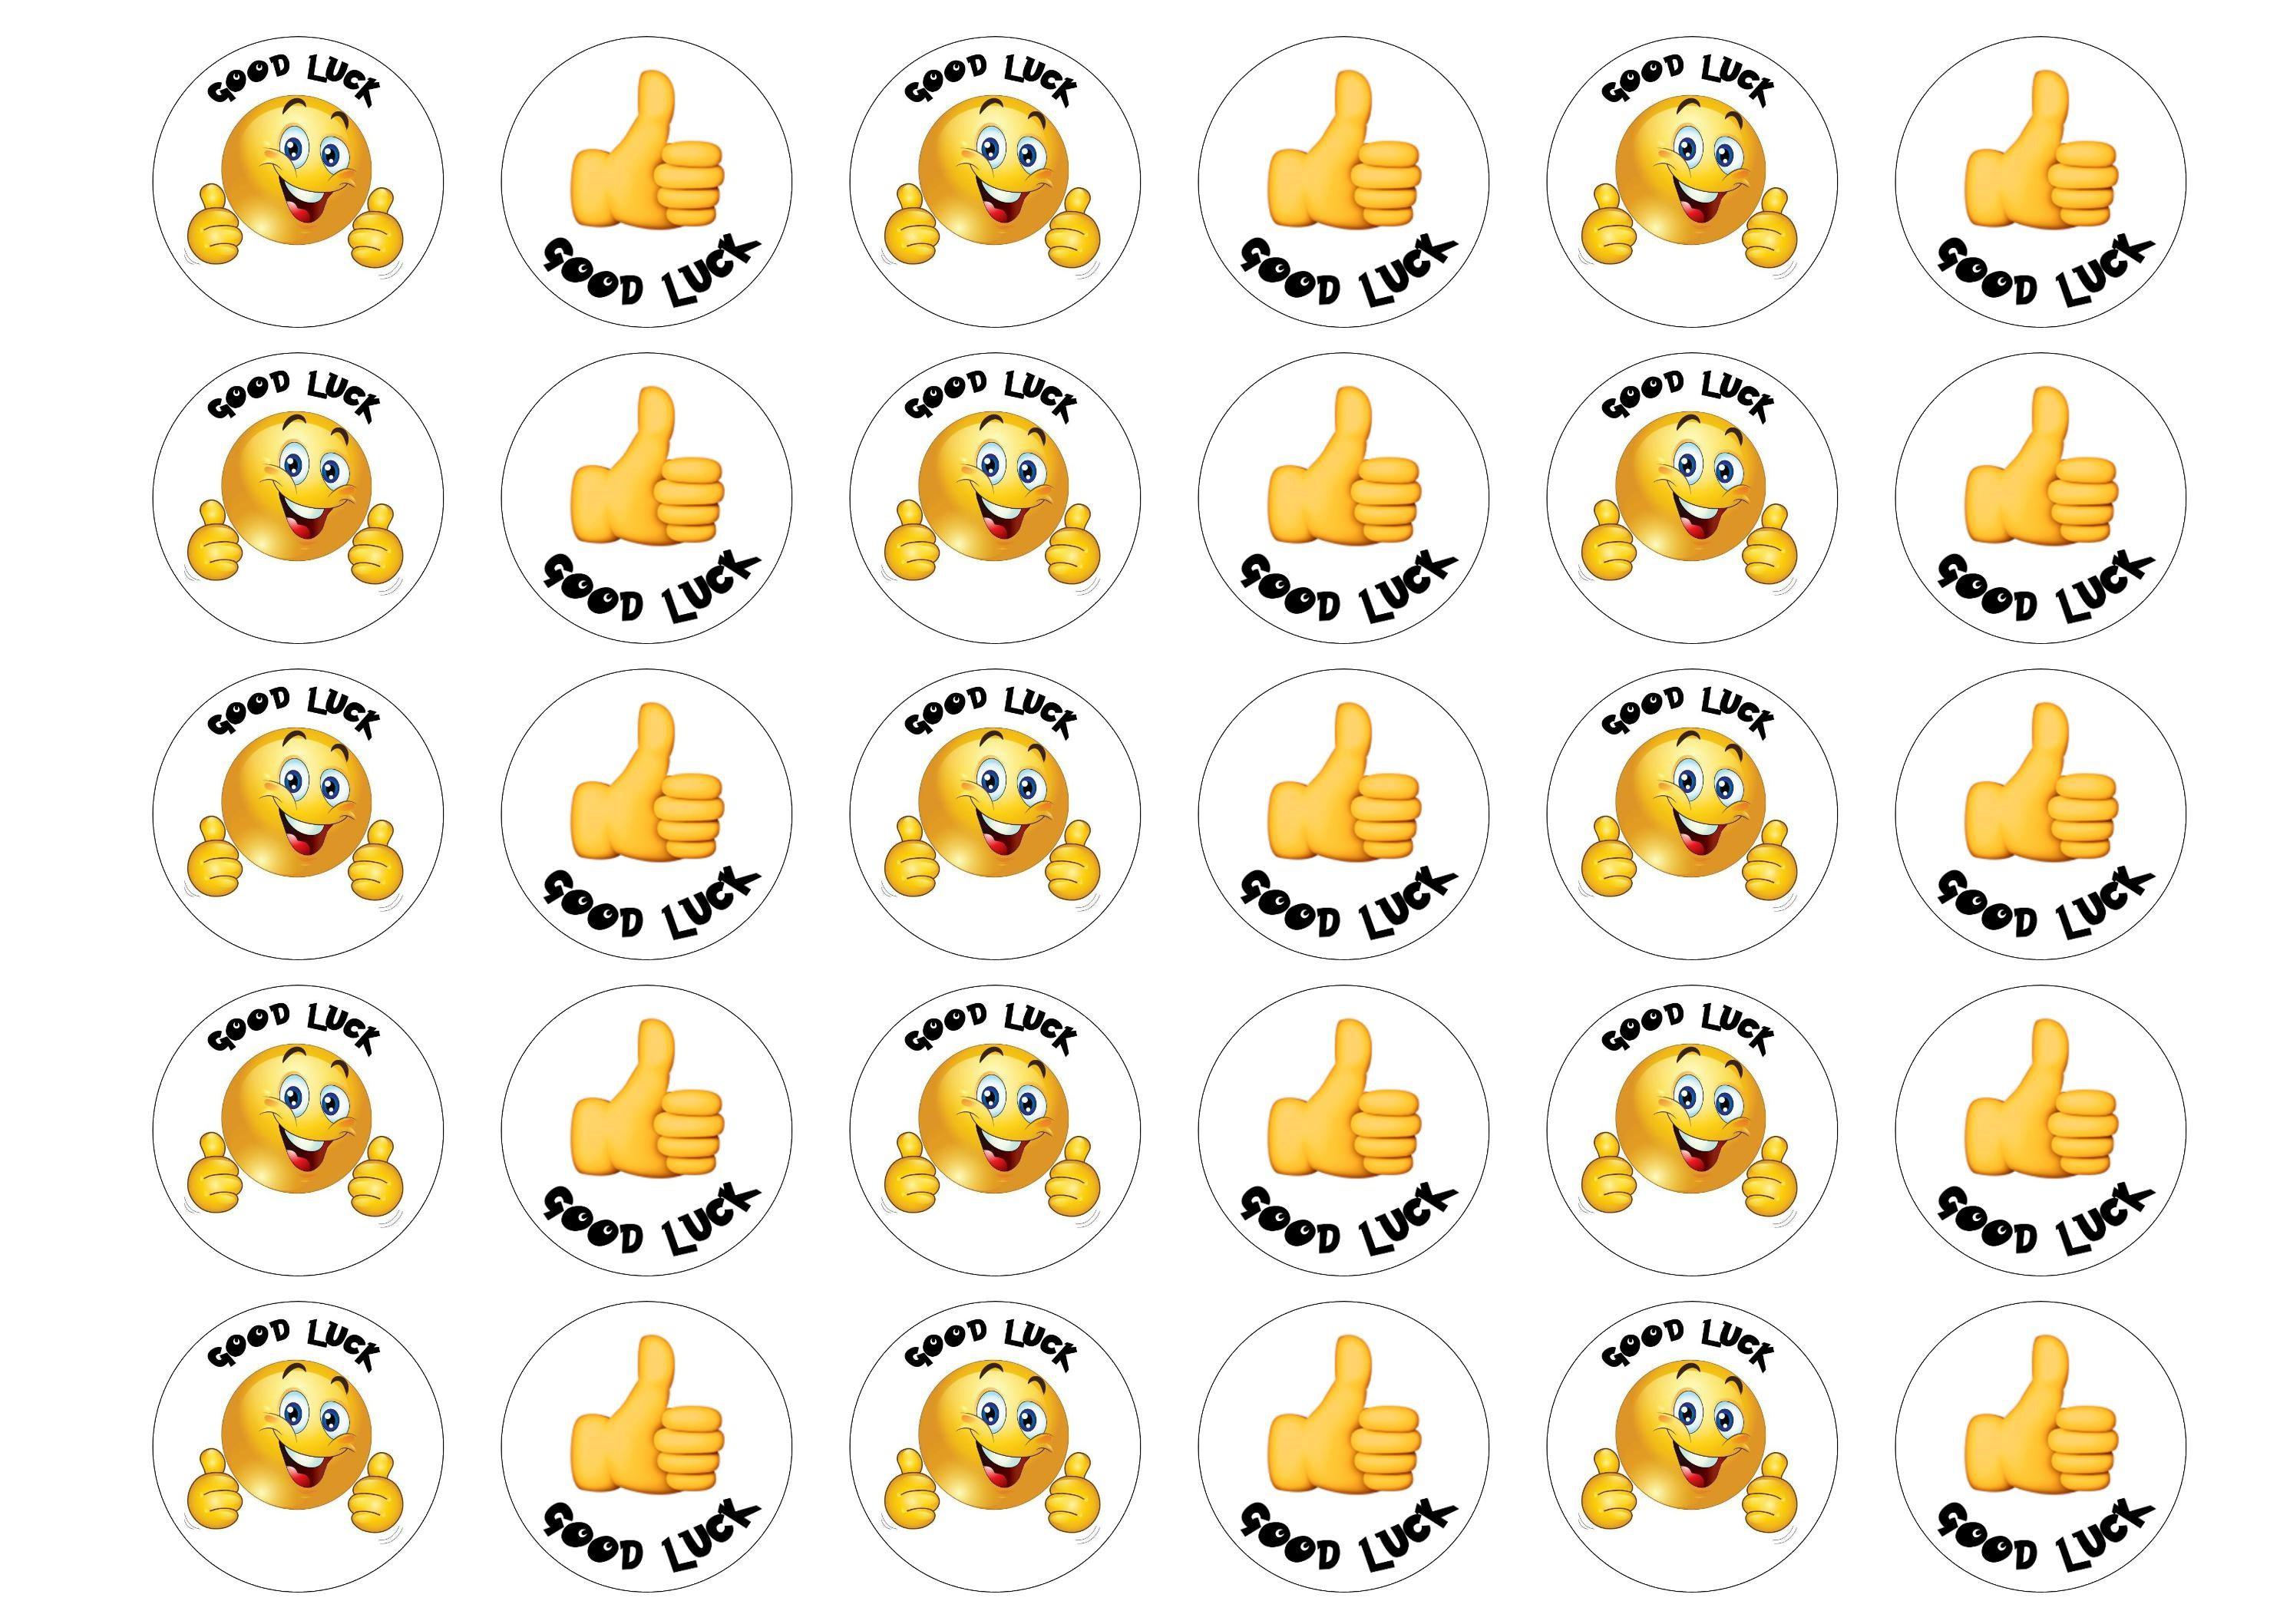 Printed edible cupcake toppers with thumbs up emojis